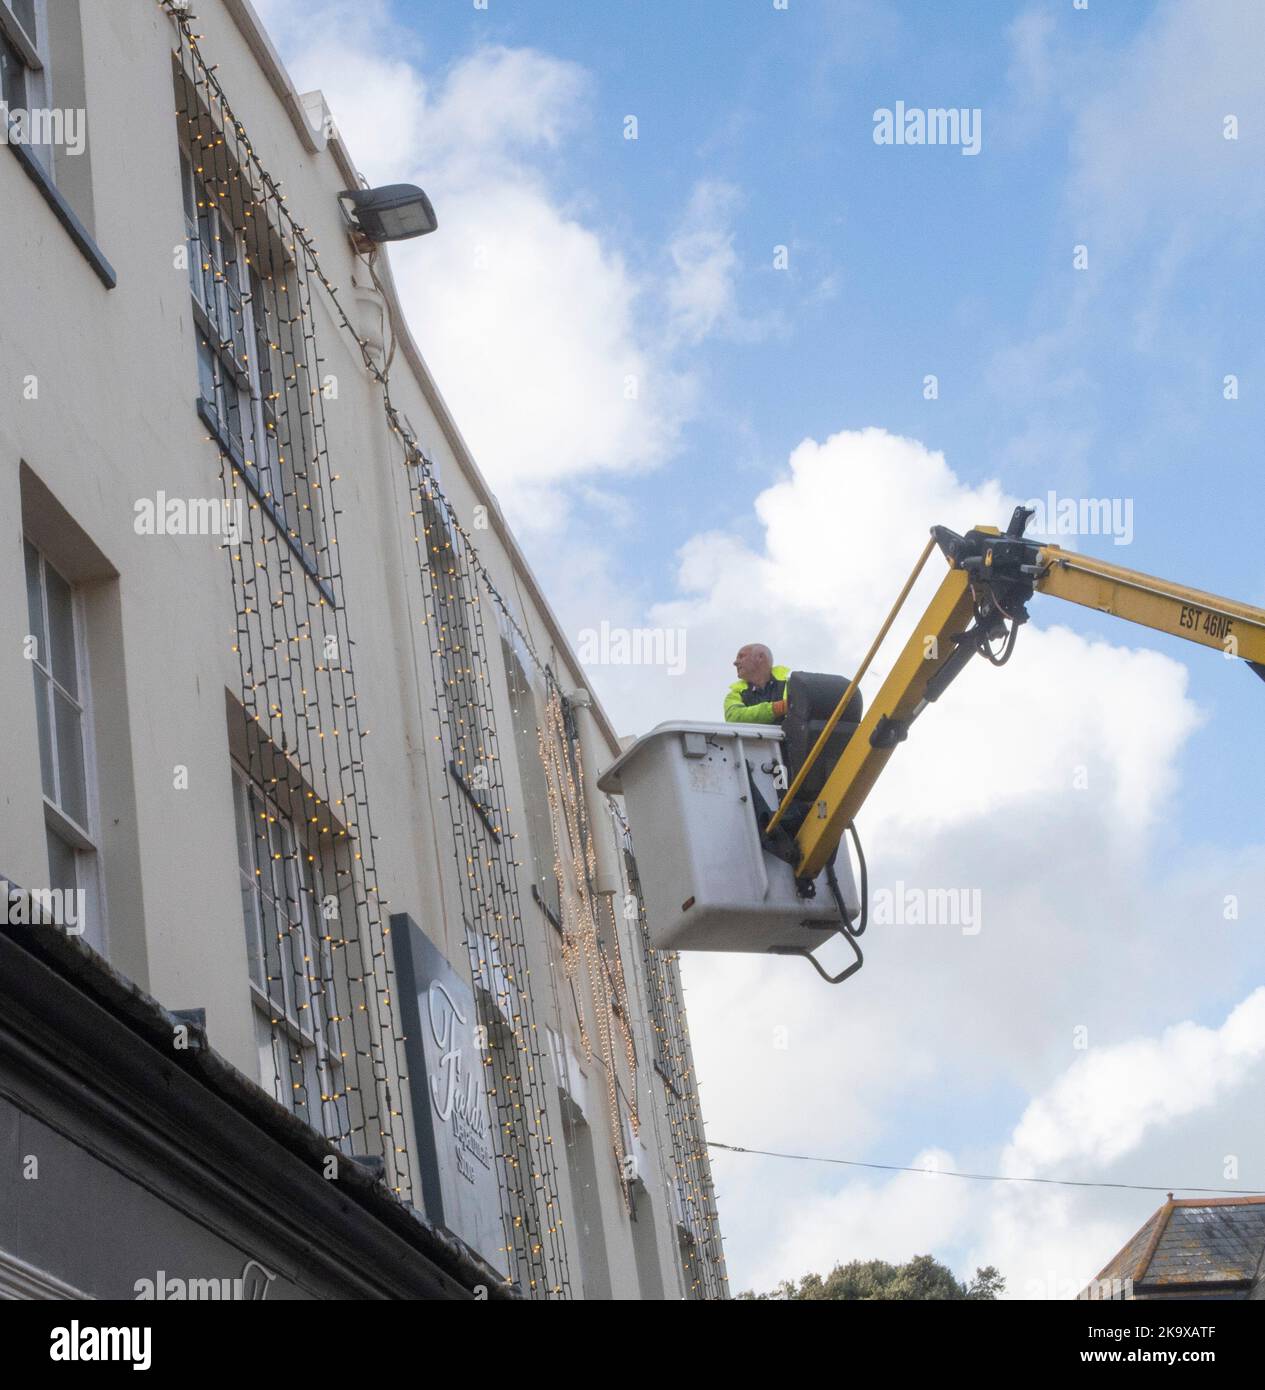 Sidmouth, Devon, 30th Oct 2022 Though not even November, contractors put up Christmas lights outside Fields department store in Sidmouth, Devon Tony Charnock/Alamy Live News Stock Photo